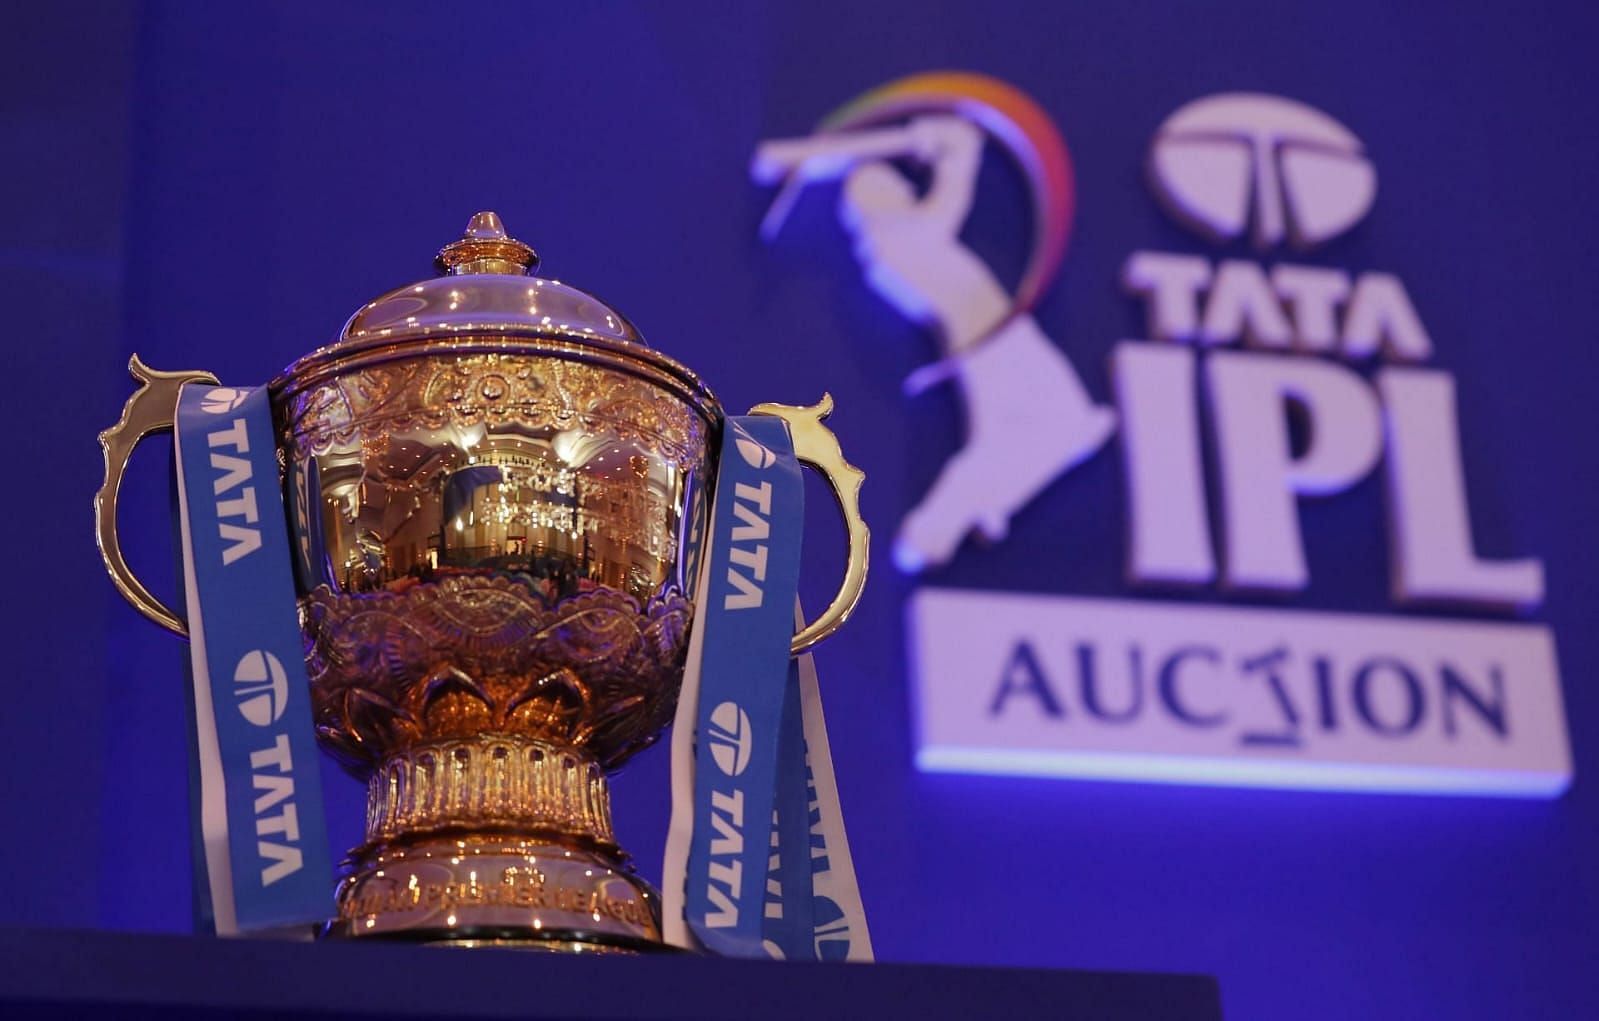 The IPL Auction will be held on 23rd December, 2022 in Kochi.